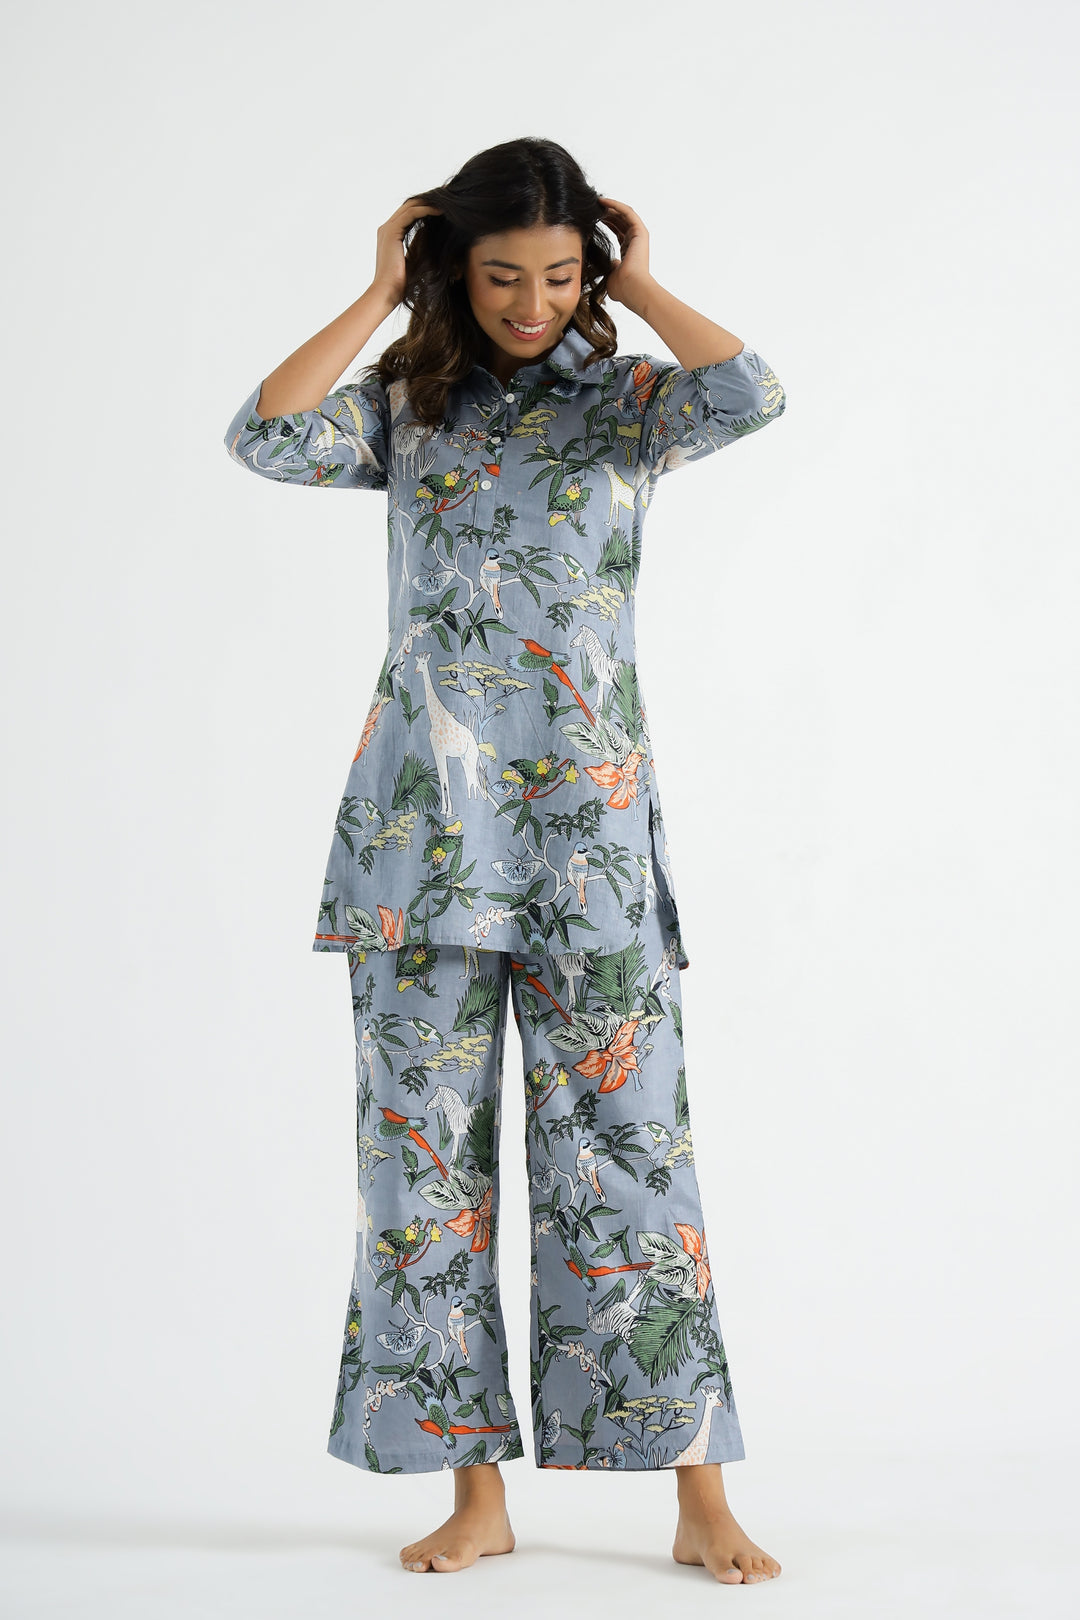 Grey Jungle Collared Cotton Lounge Co-Ord Set with 3 button